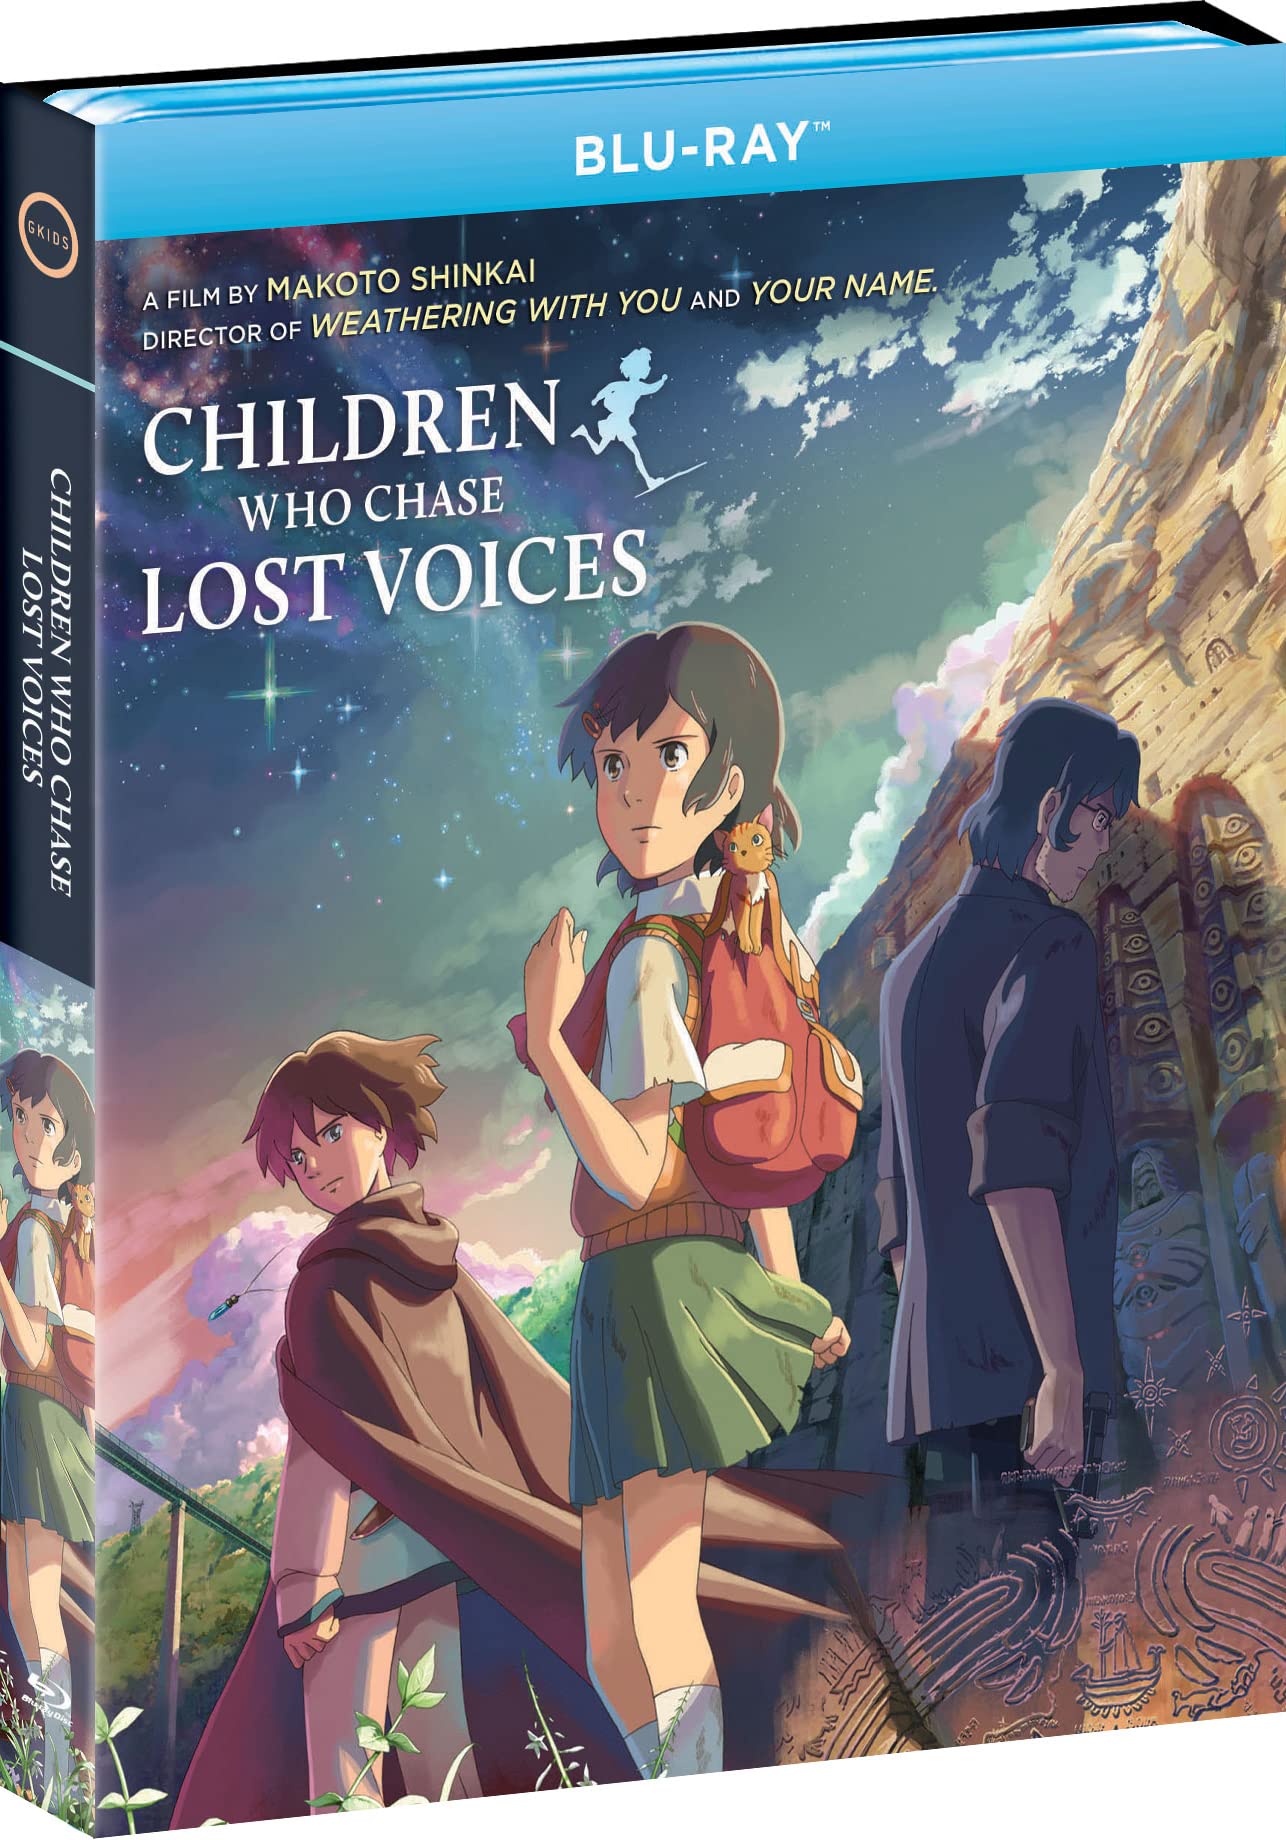 Children Who Chase Lost Voices [Blu-ray] on MovieShack